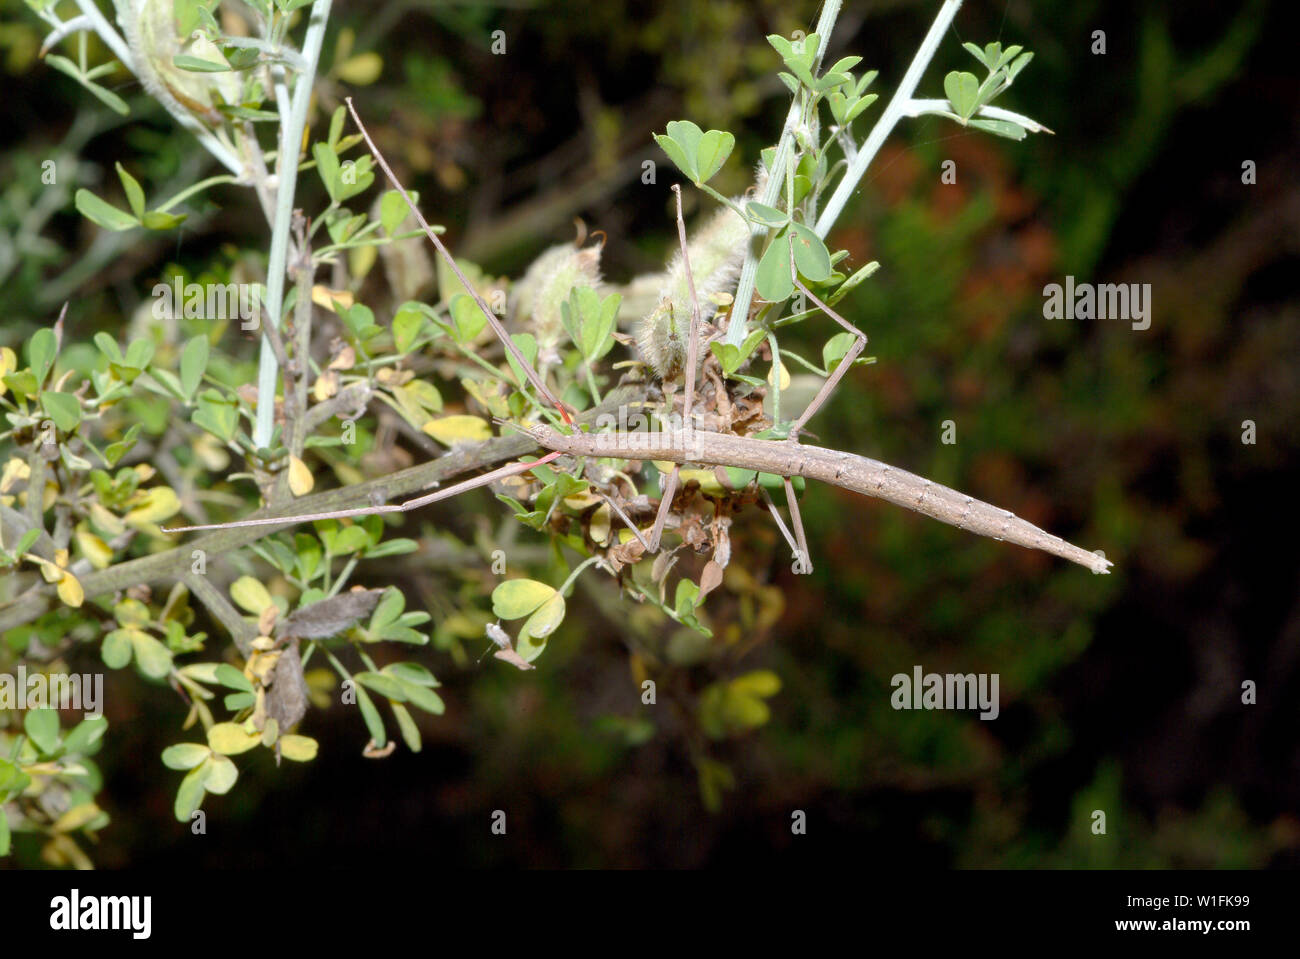 French stick insect, Clonopsis gallica Stock Photo